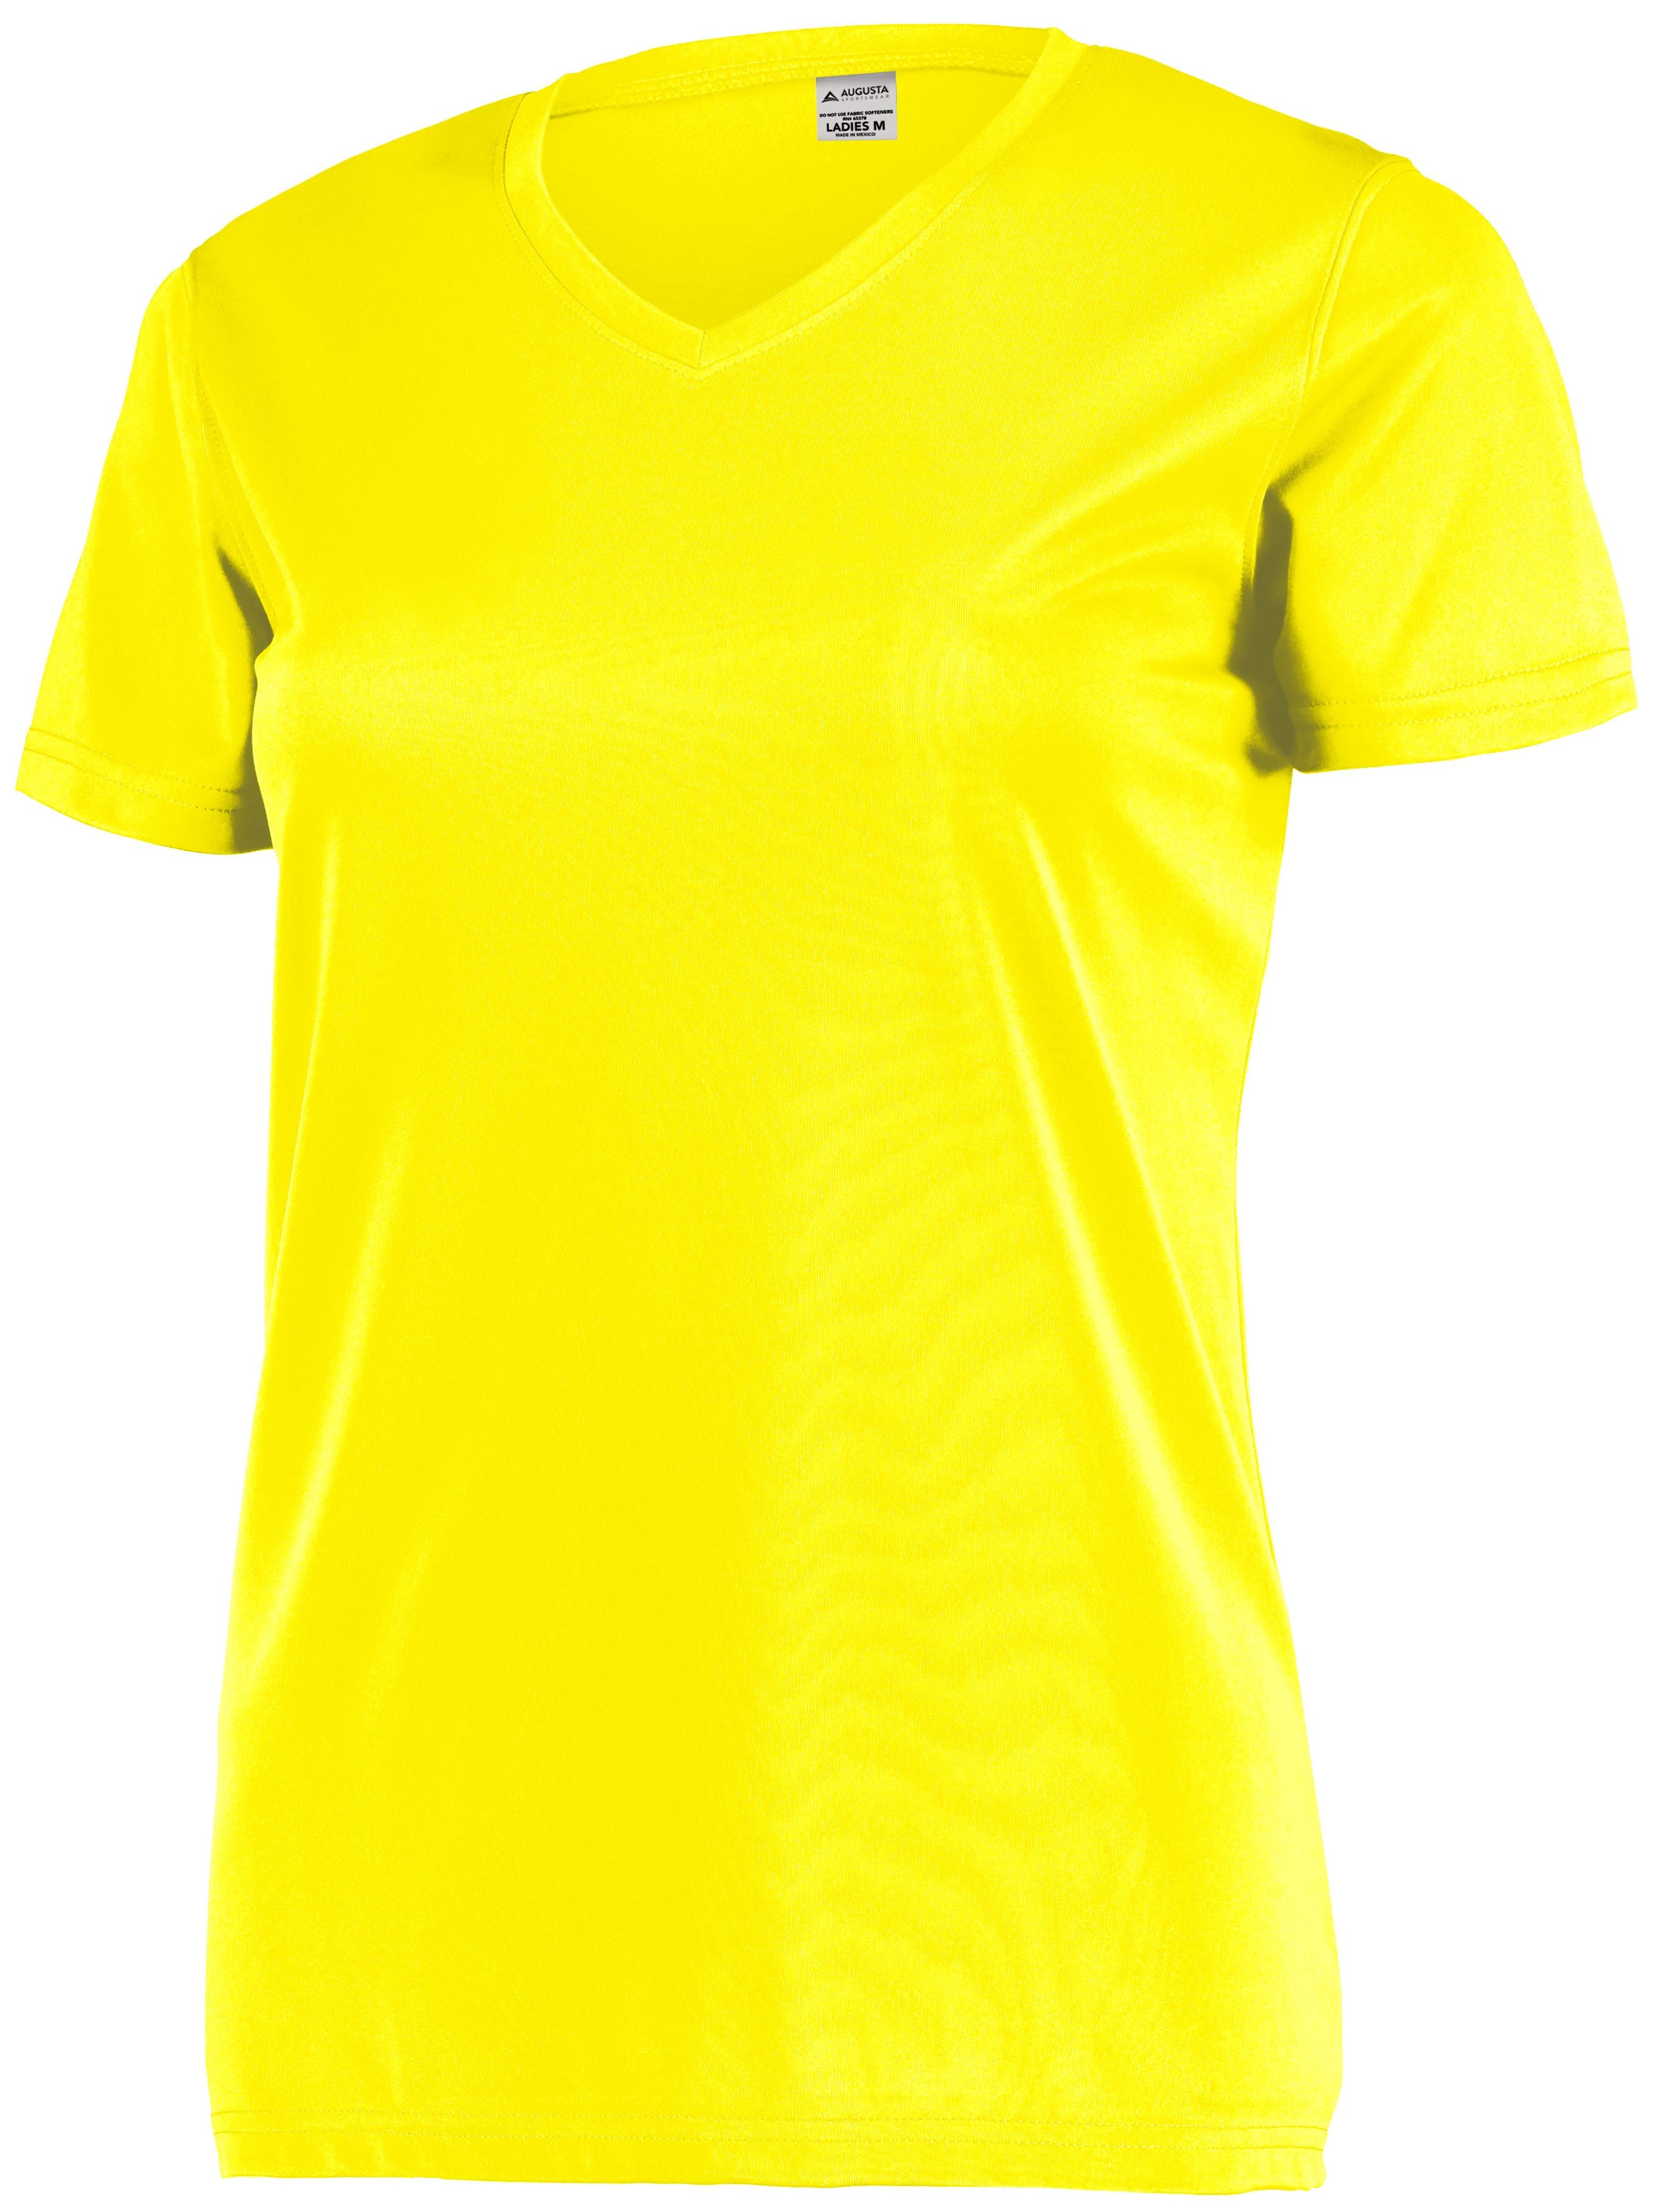 Augusta Sportswear Ladies Attain Wicking Set-In Sleeve Tee in Electric Yellow  -Part of the Ladies, Ladies-Tee-Shirt, T-Shirts, Augusta-Products, Shirts product lines at KanaleyCreations.com